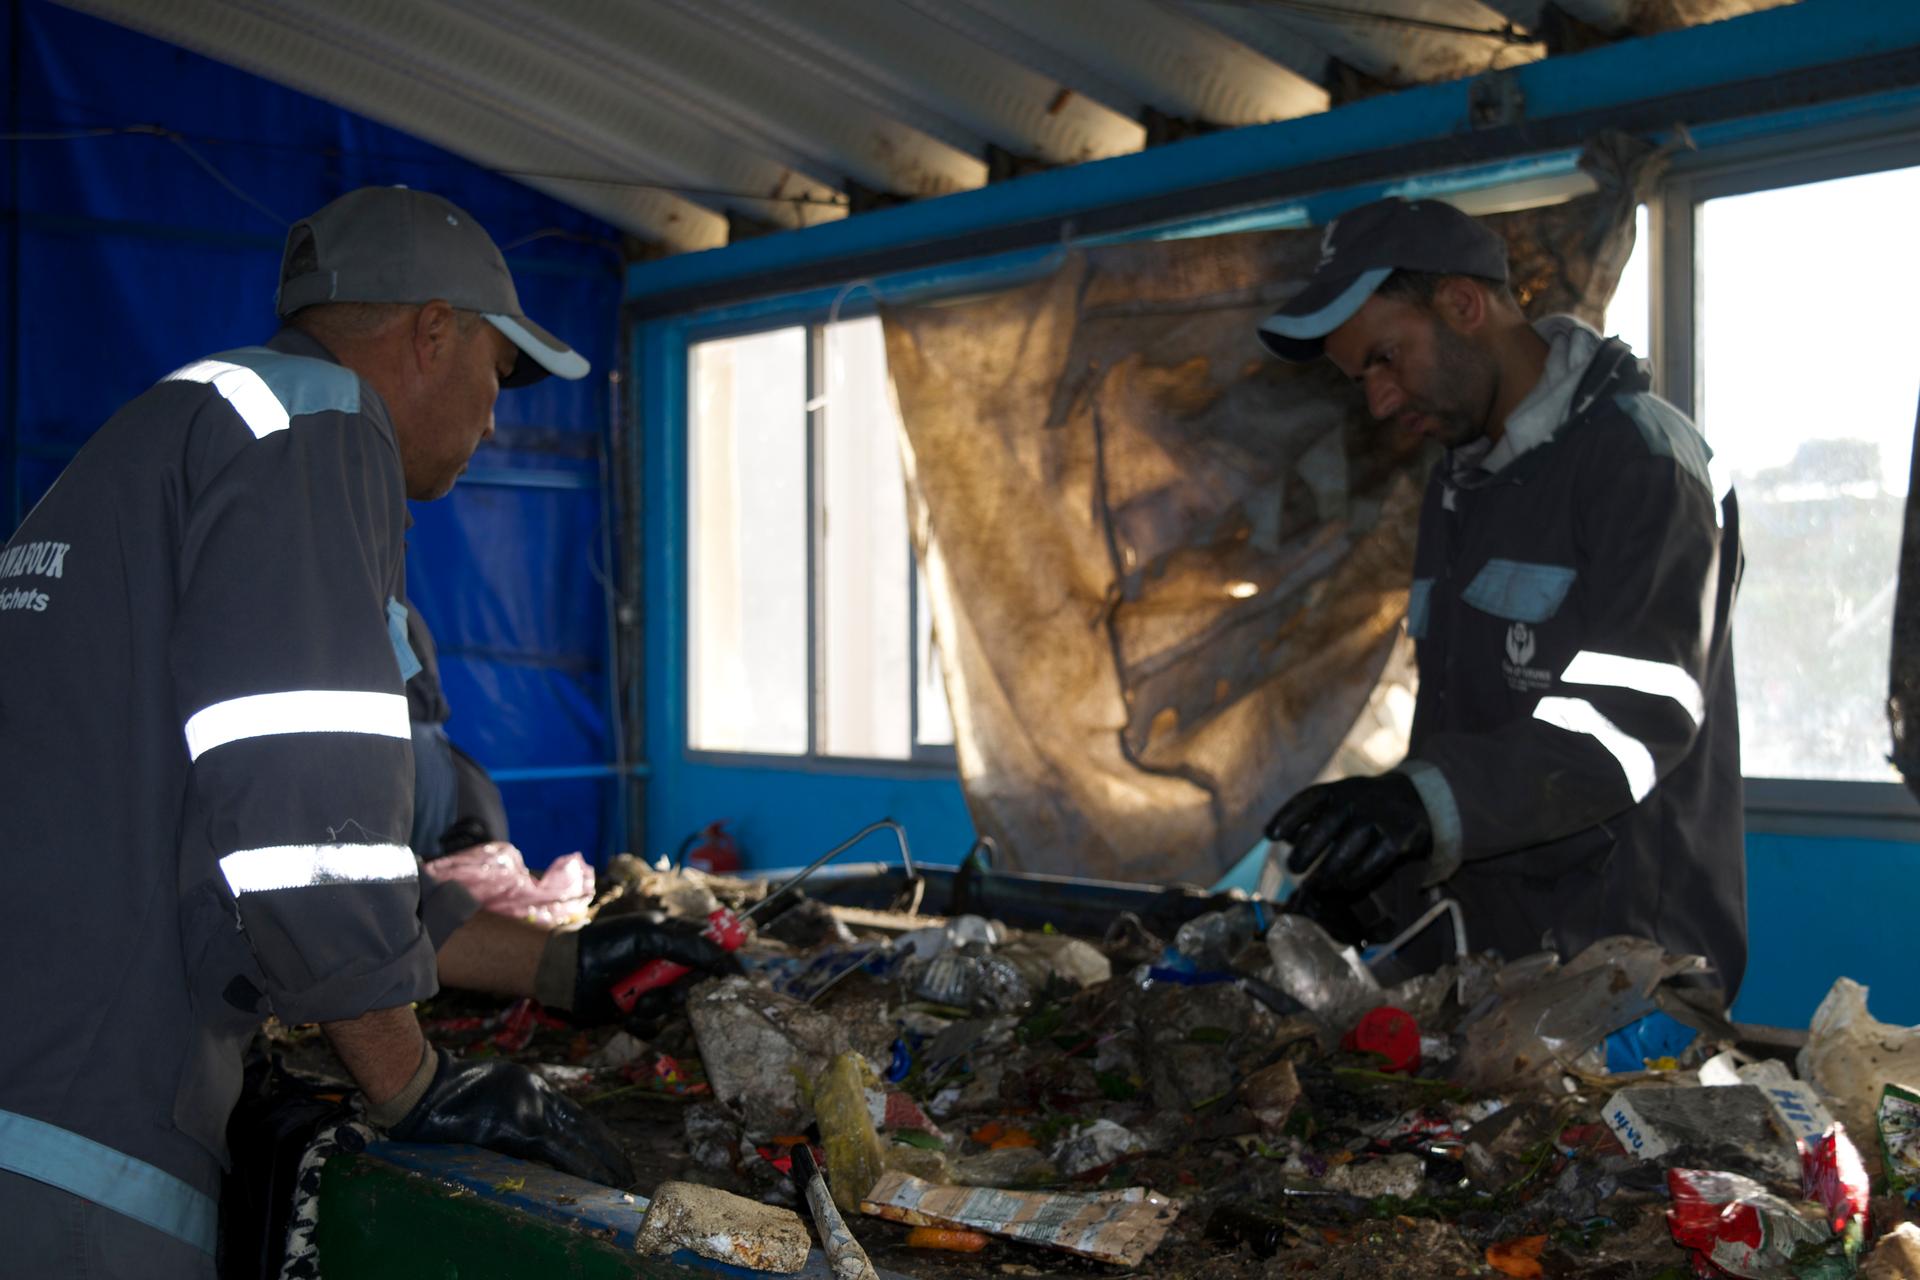 The former trash pickers went from competitors for junk at the dump to co-workers at the new recycling facility. Together they recycled more than 12,000 tons of trash in 2016. Backers hope the new facility will be a model for others around the world.